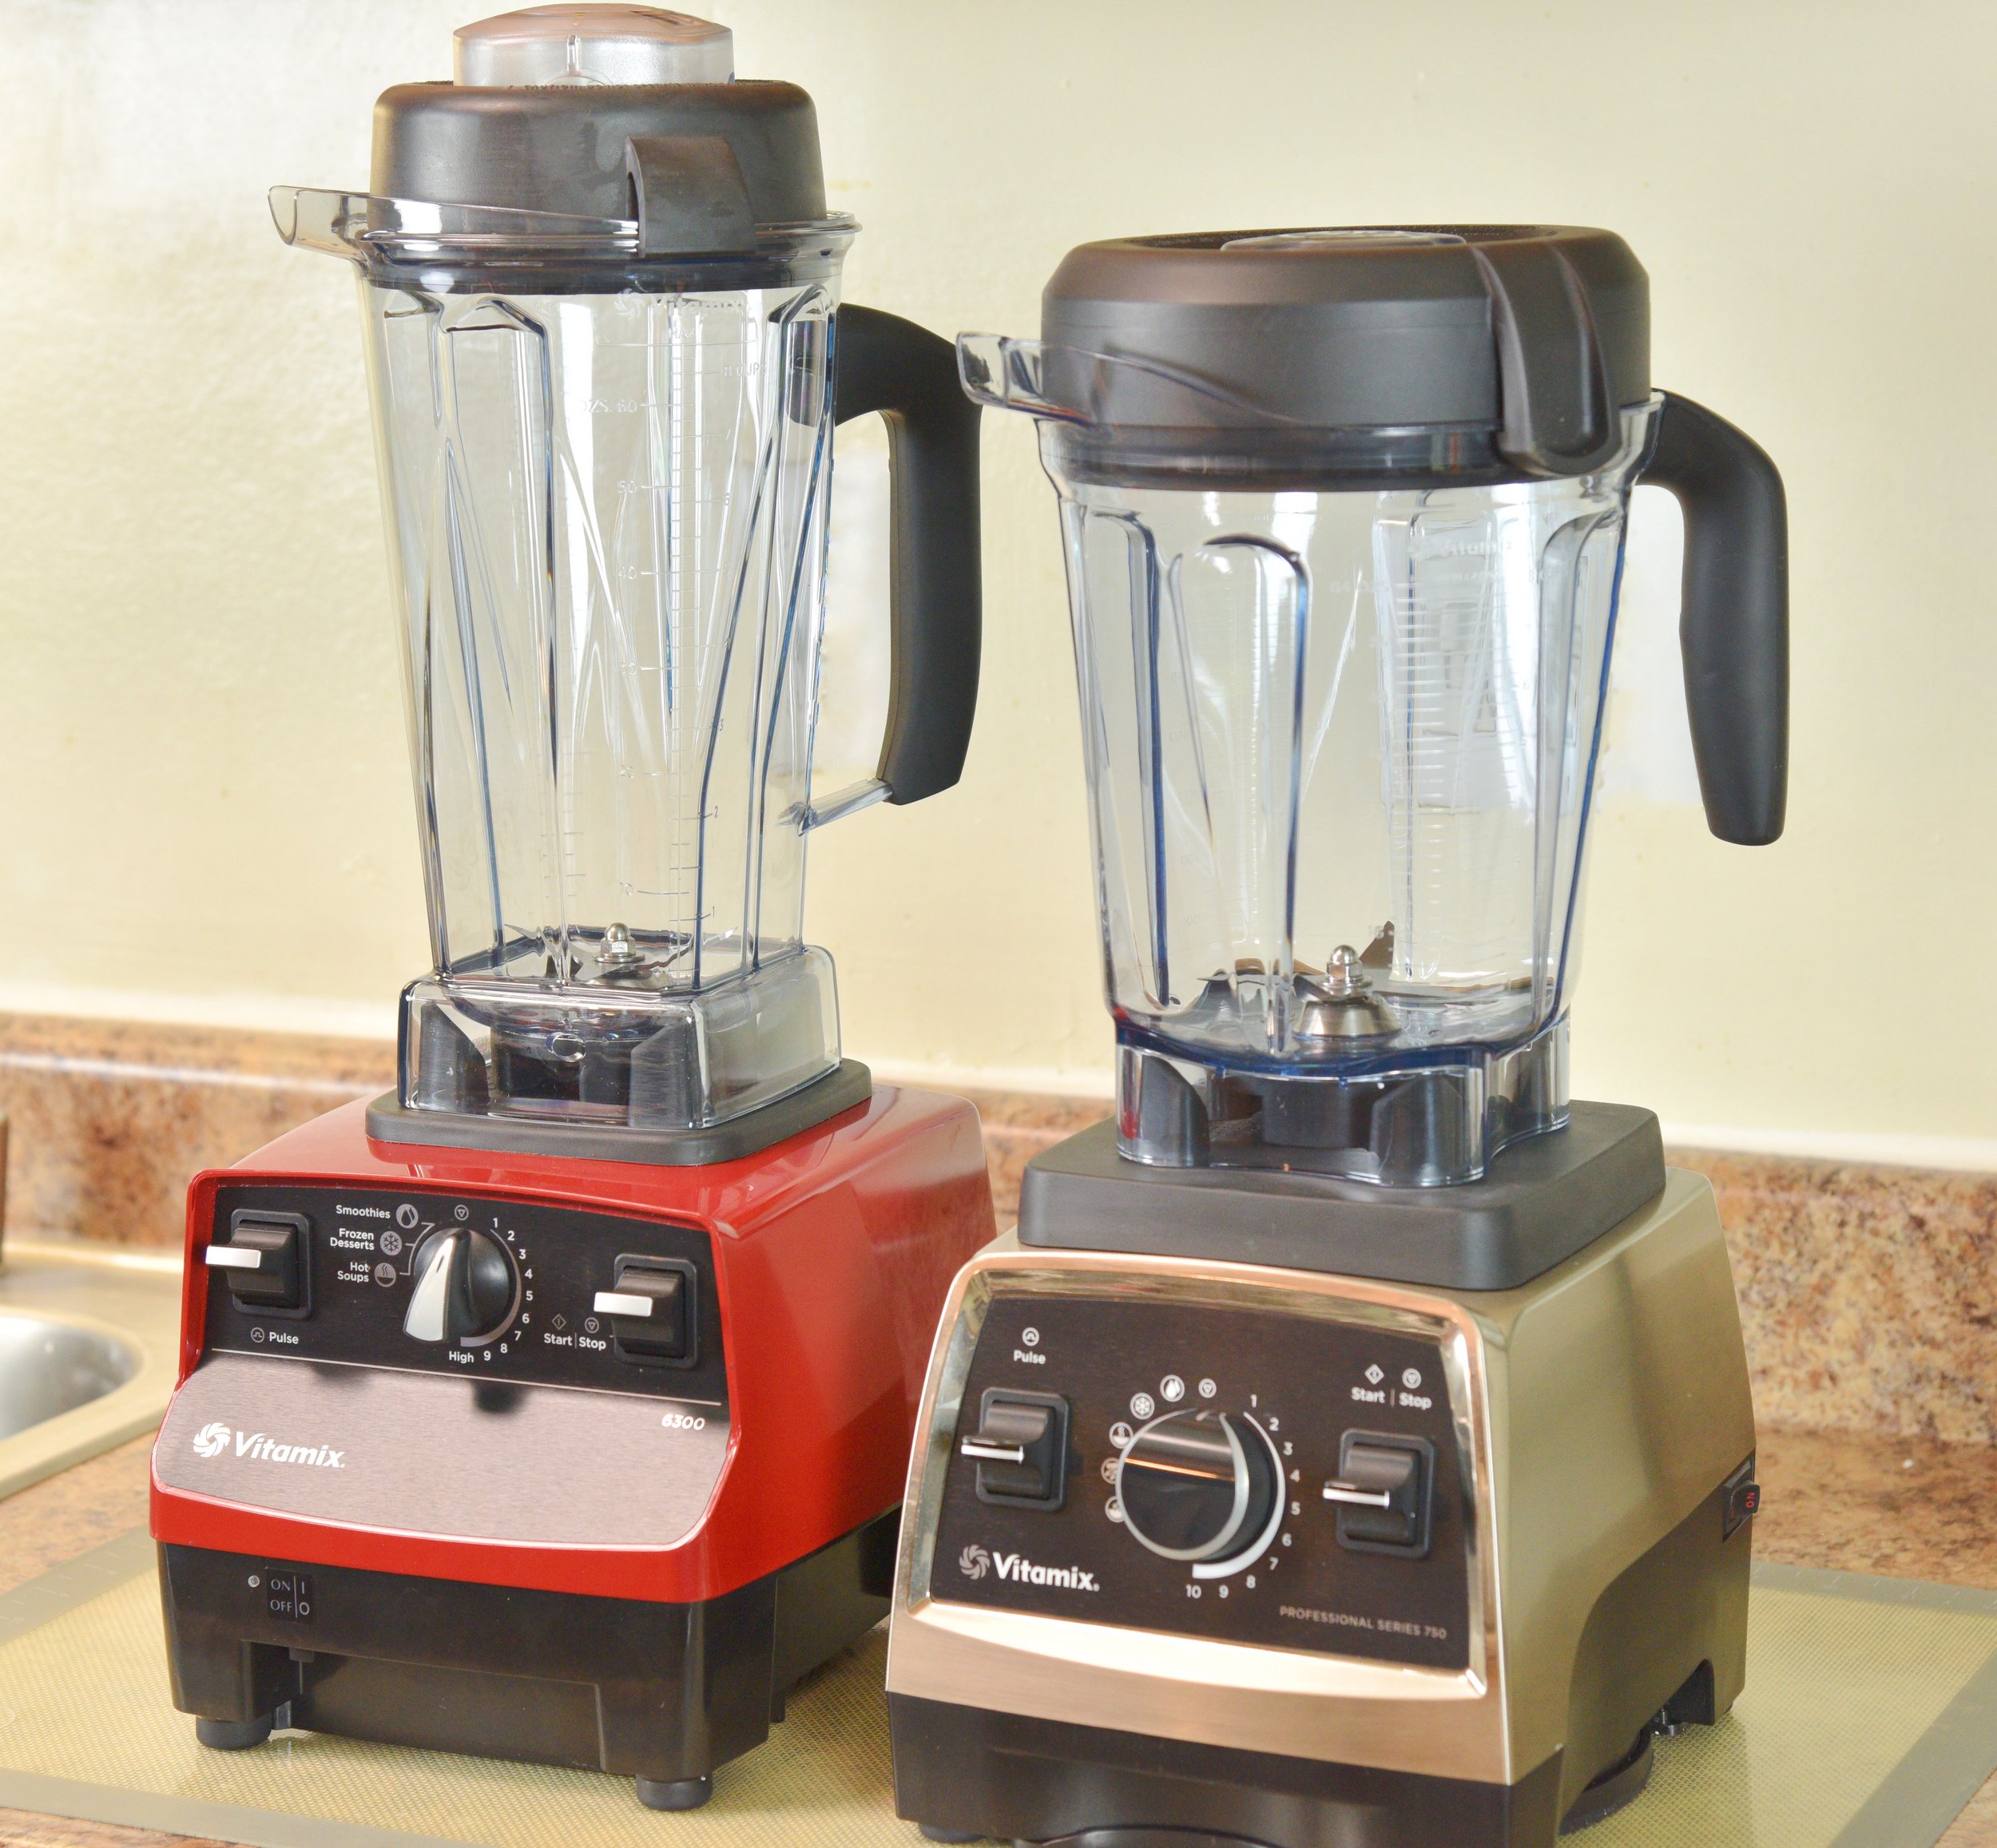 Best Vitamix to Buy - a Complete 2023 Model Comparison Review